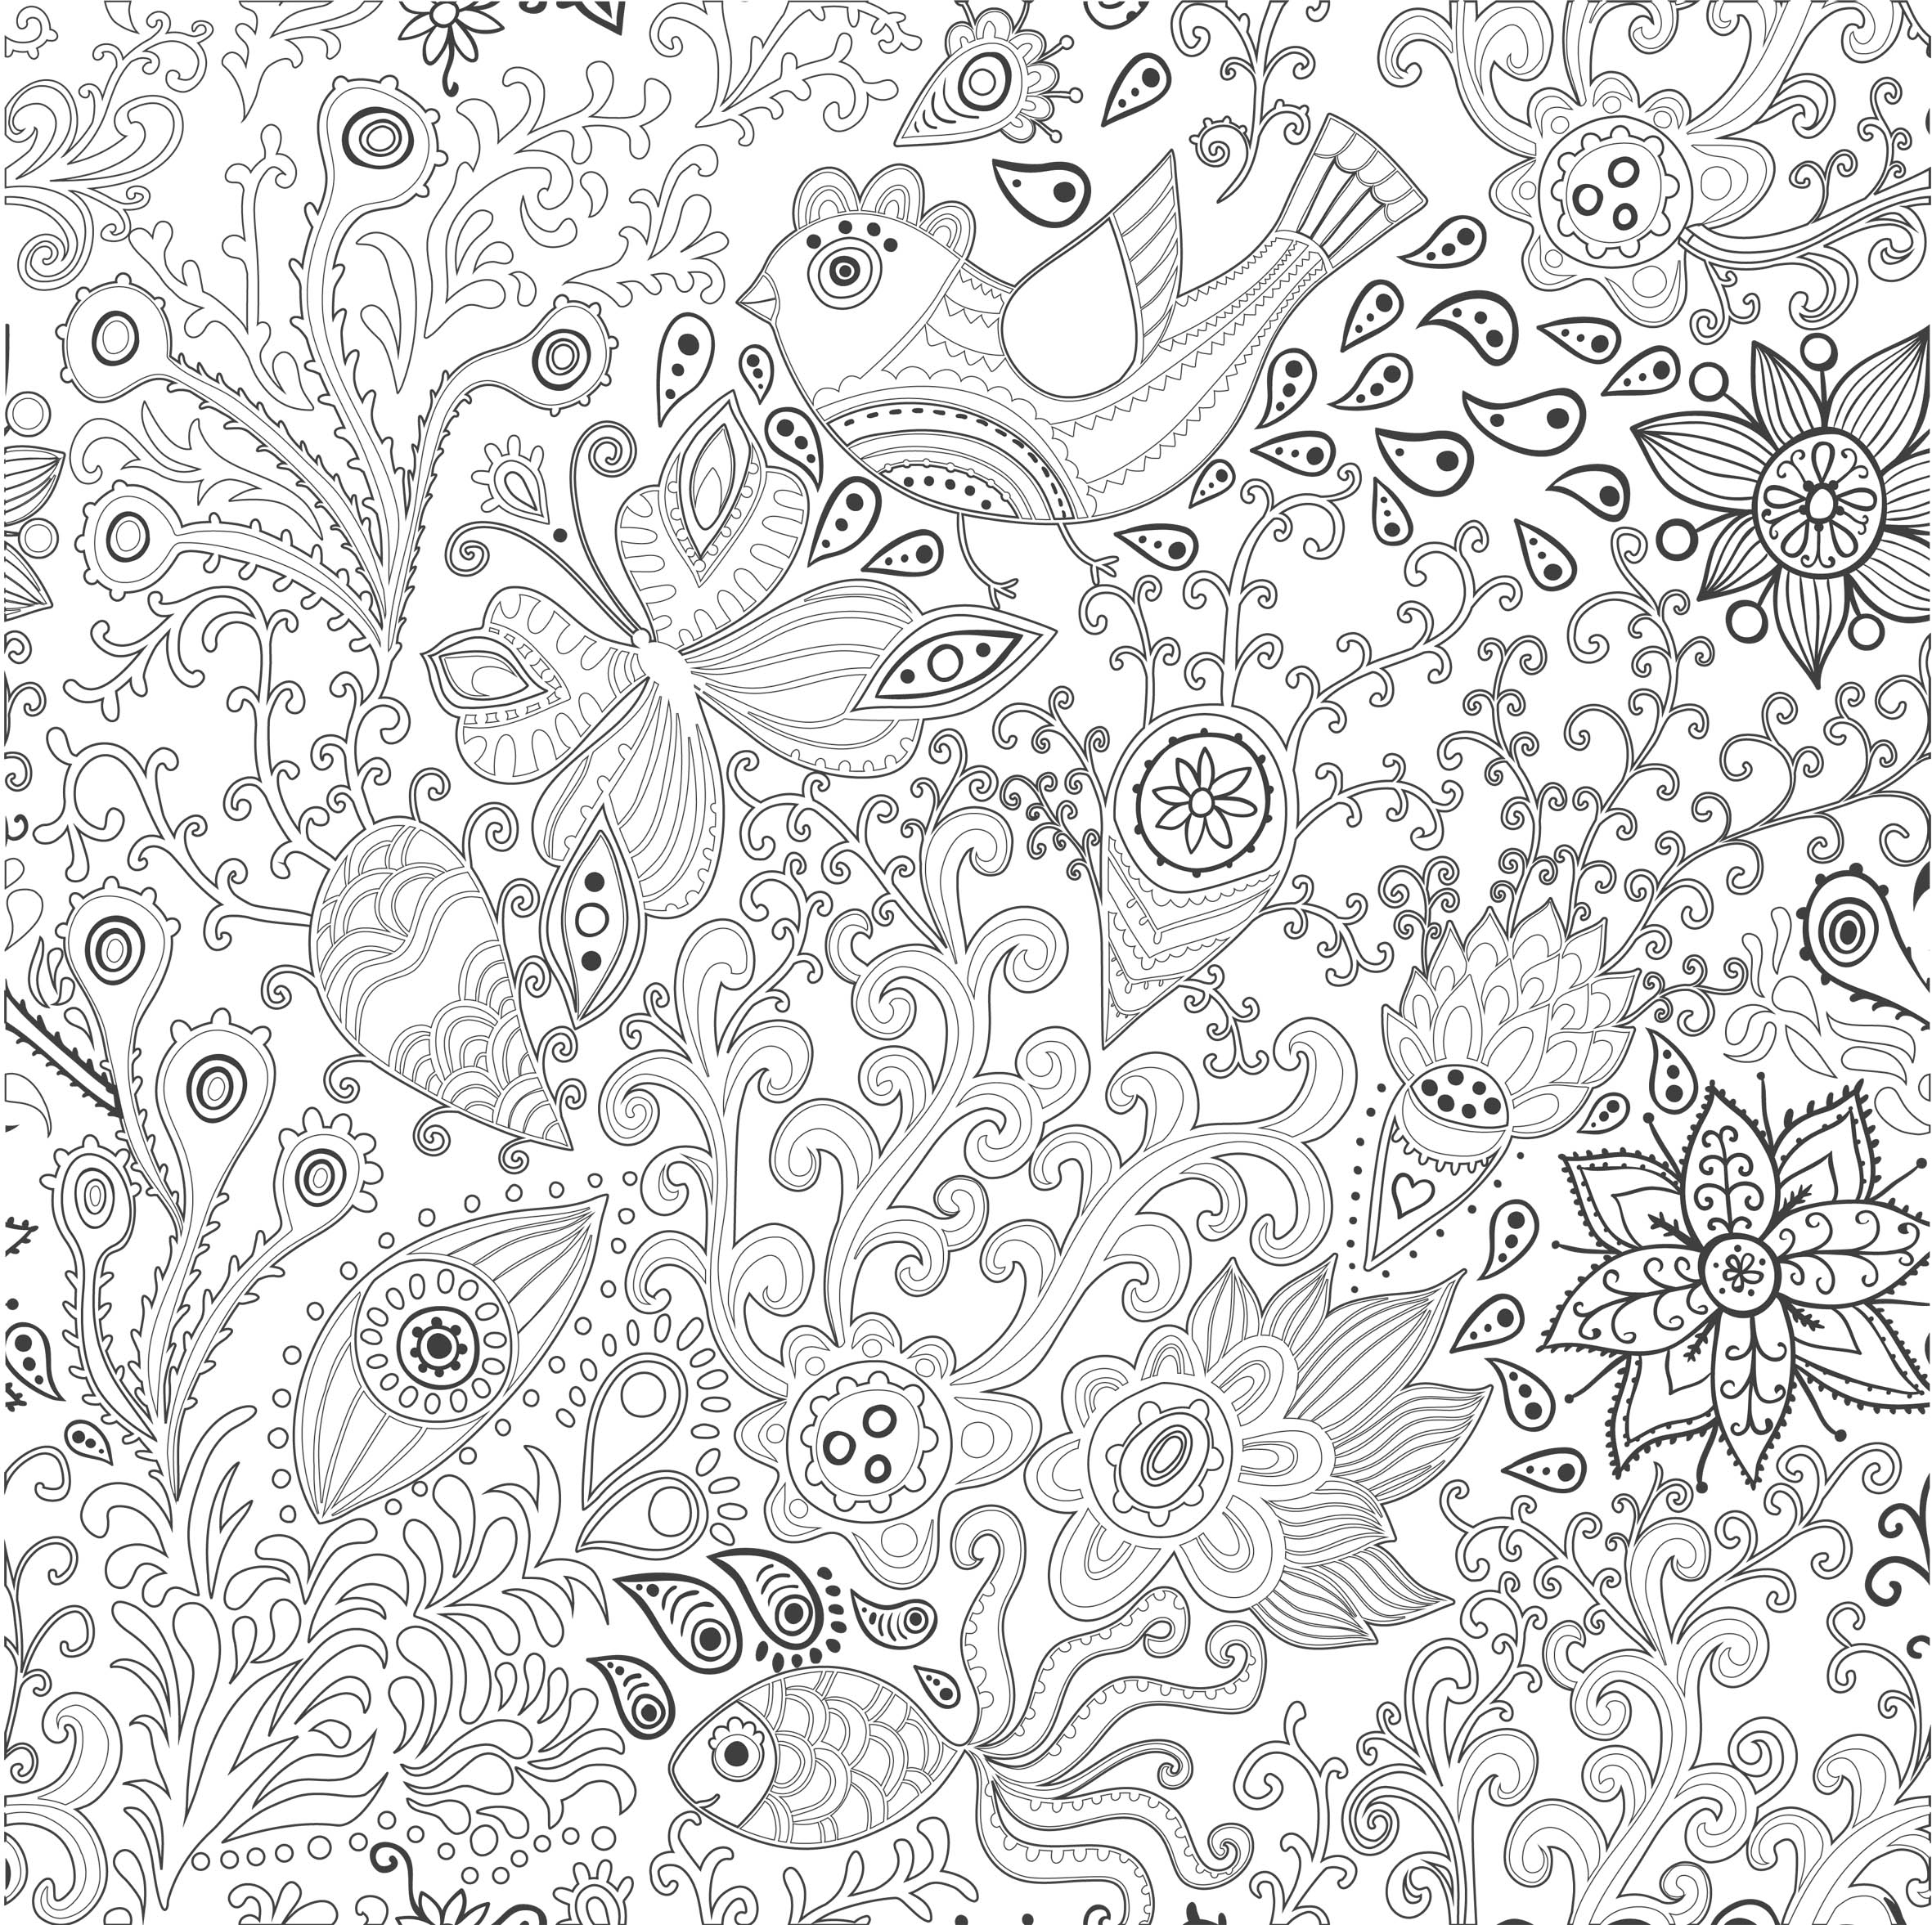 Coloring page: Anti-stress (Relaxation) #126768 - Printable coloring pages